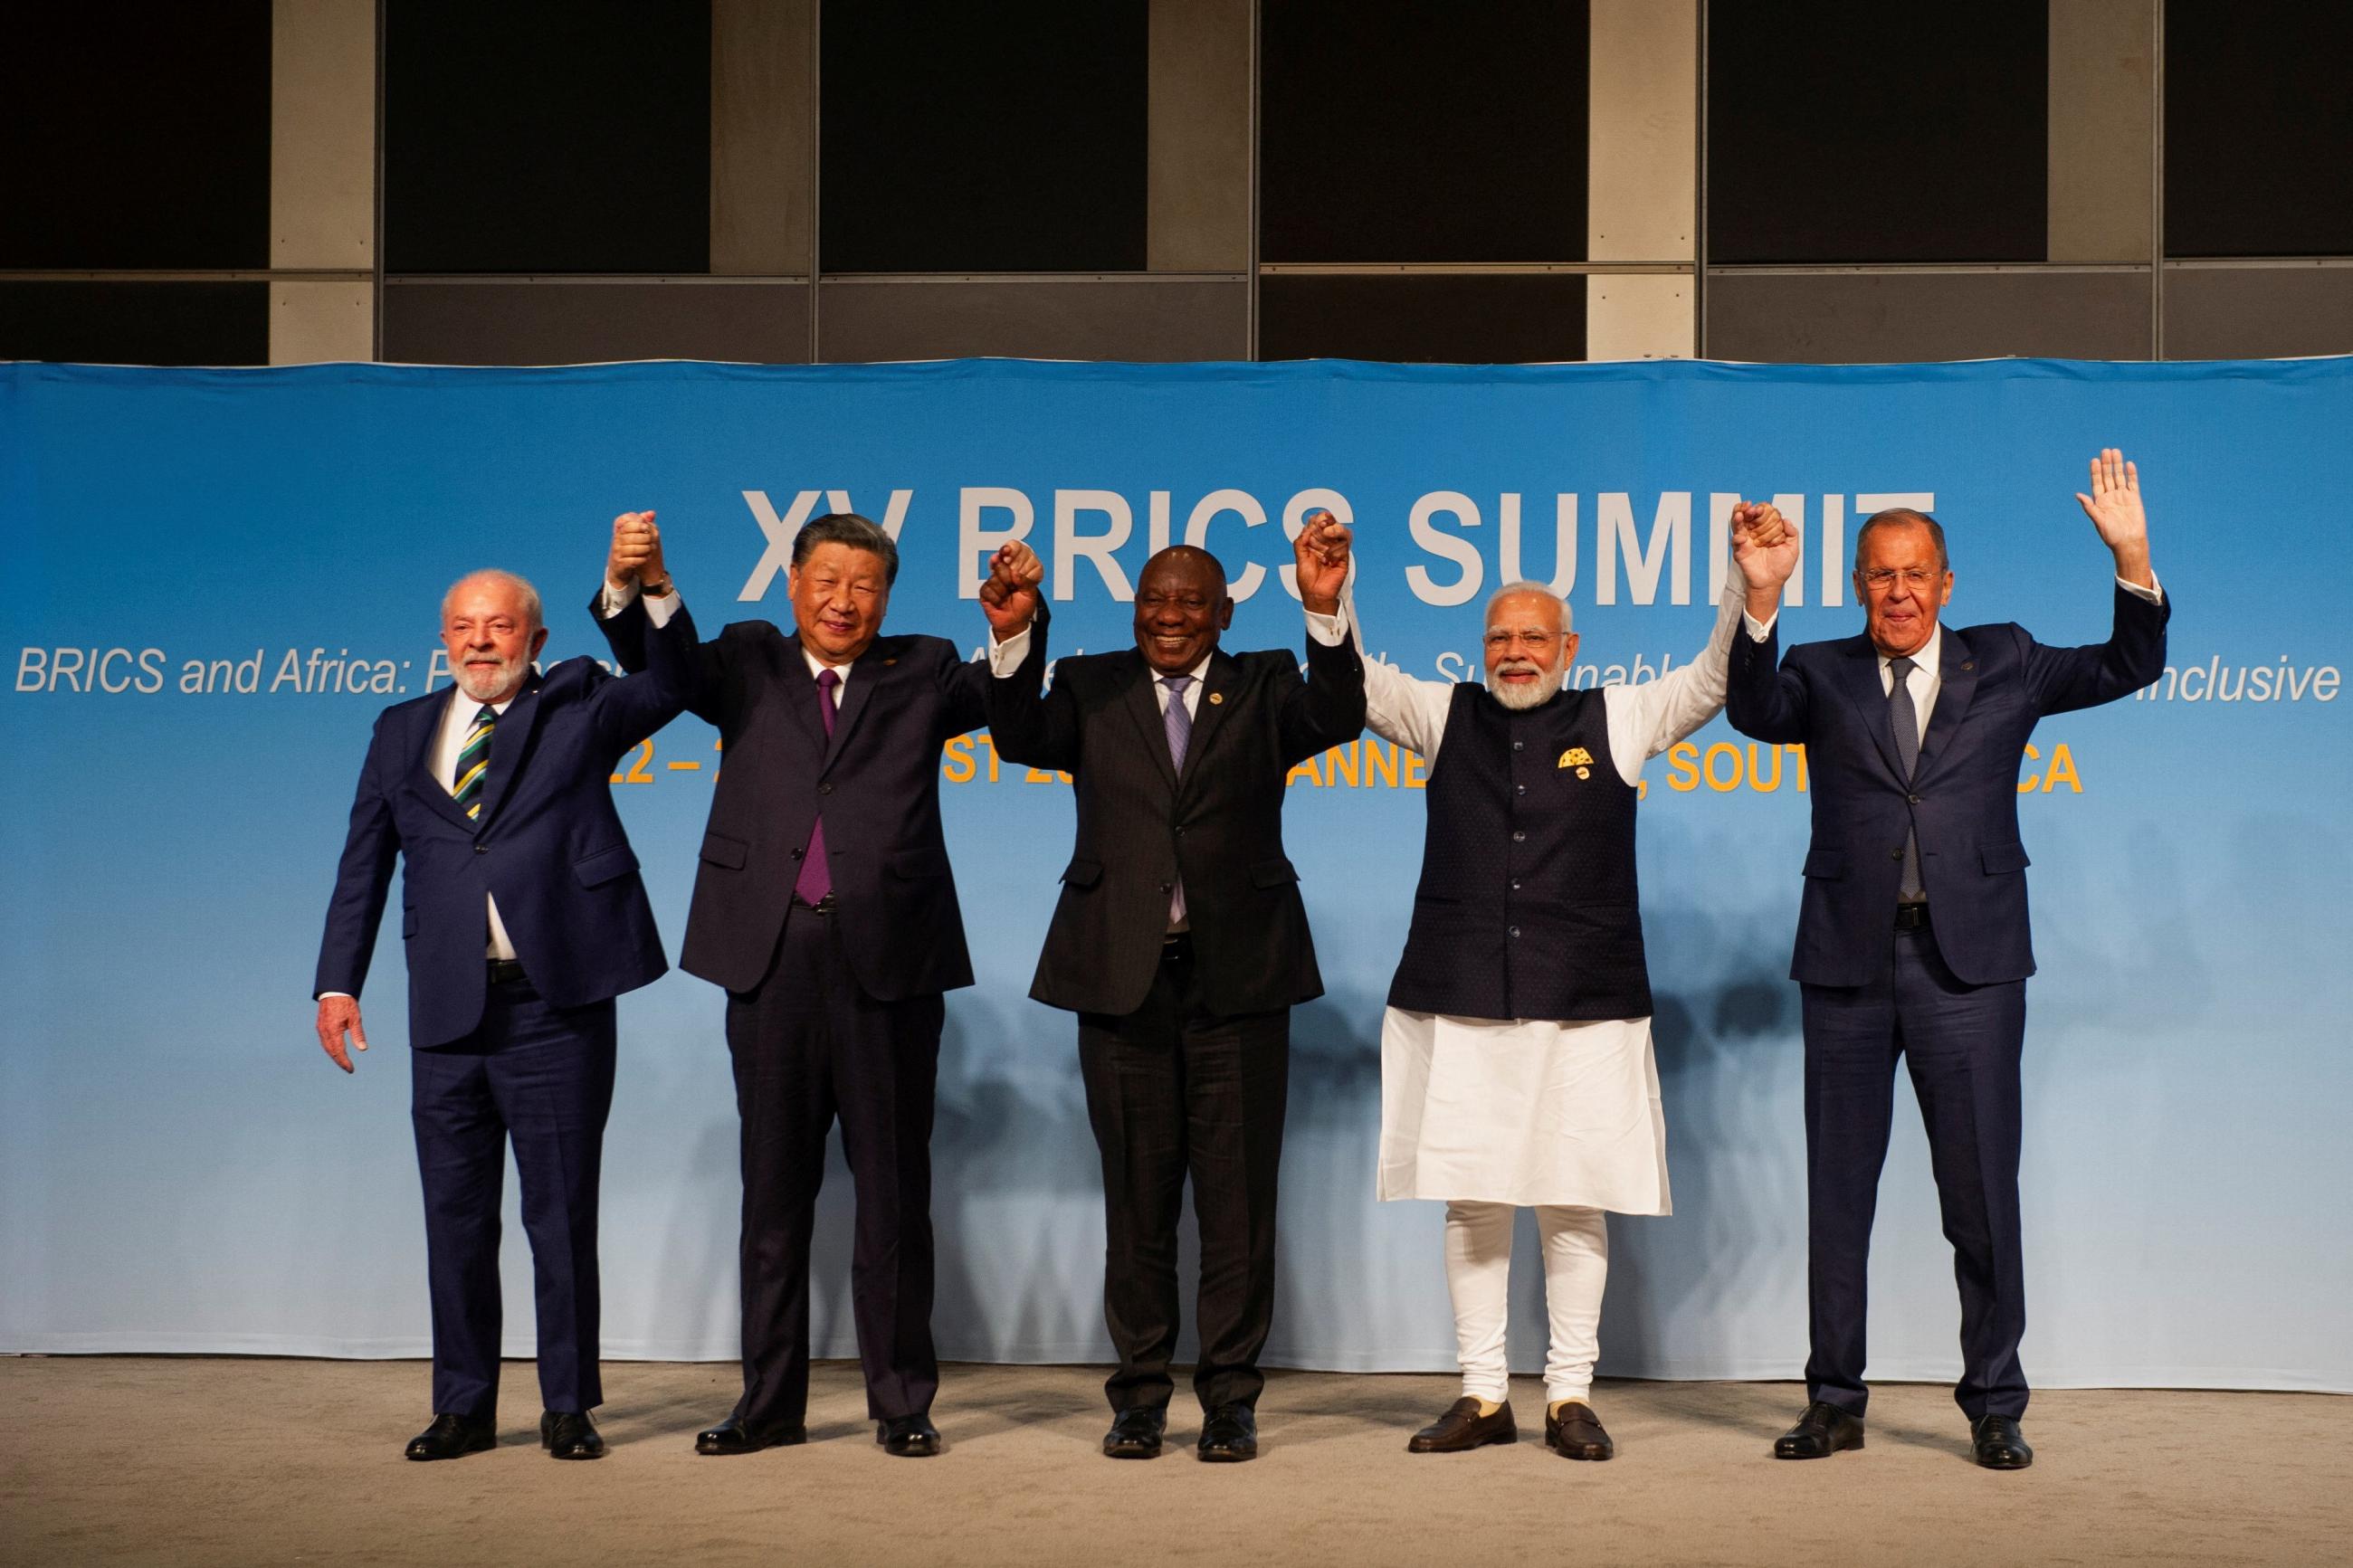 BRICS leaders pose for a picture at the BRICS Summit in Johannesburg, South Africa on August 23, 2023.